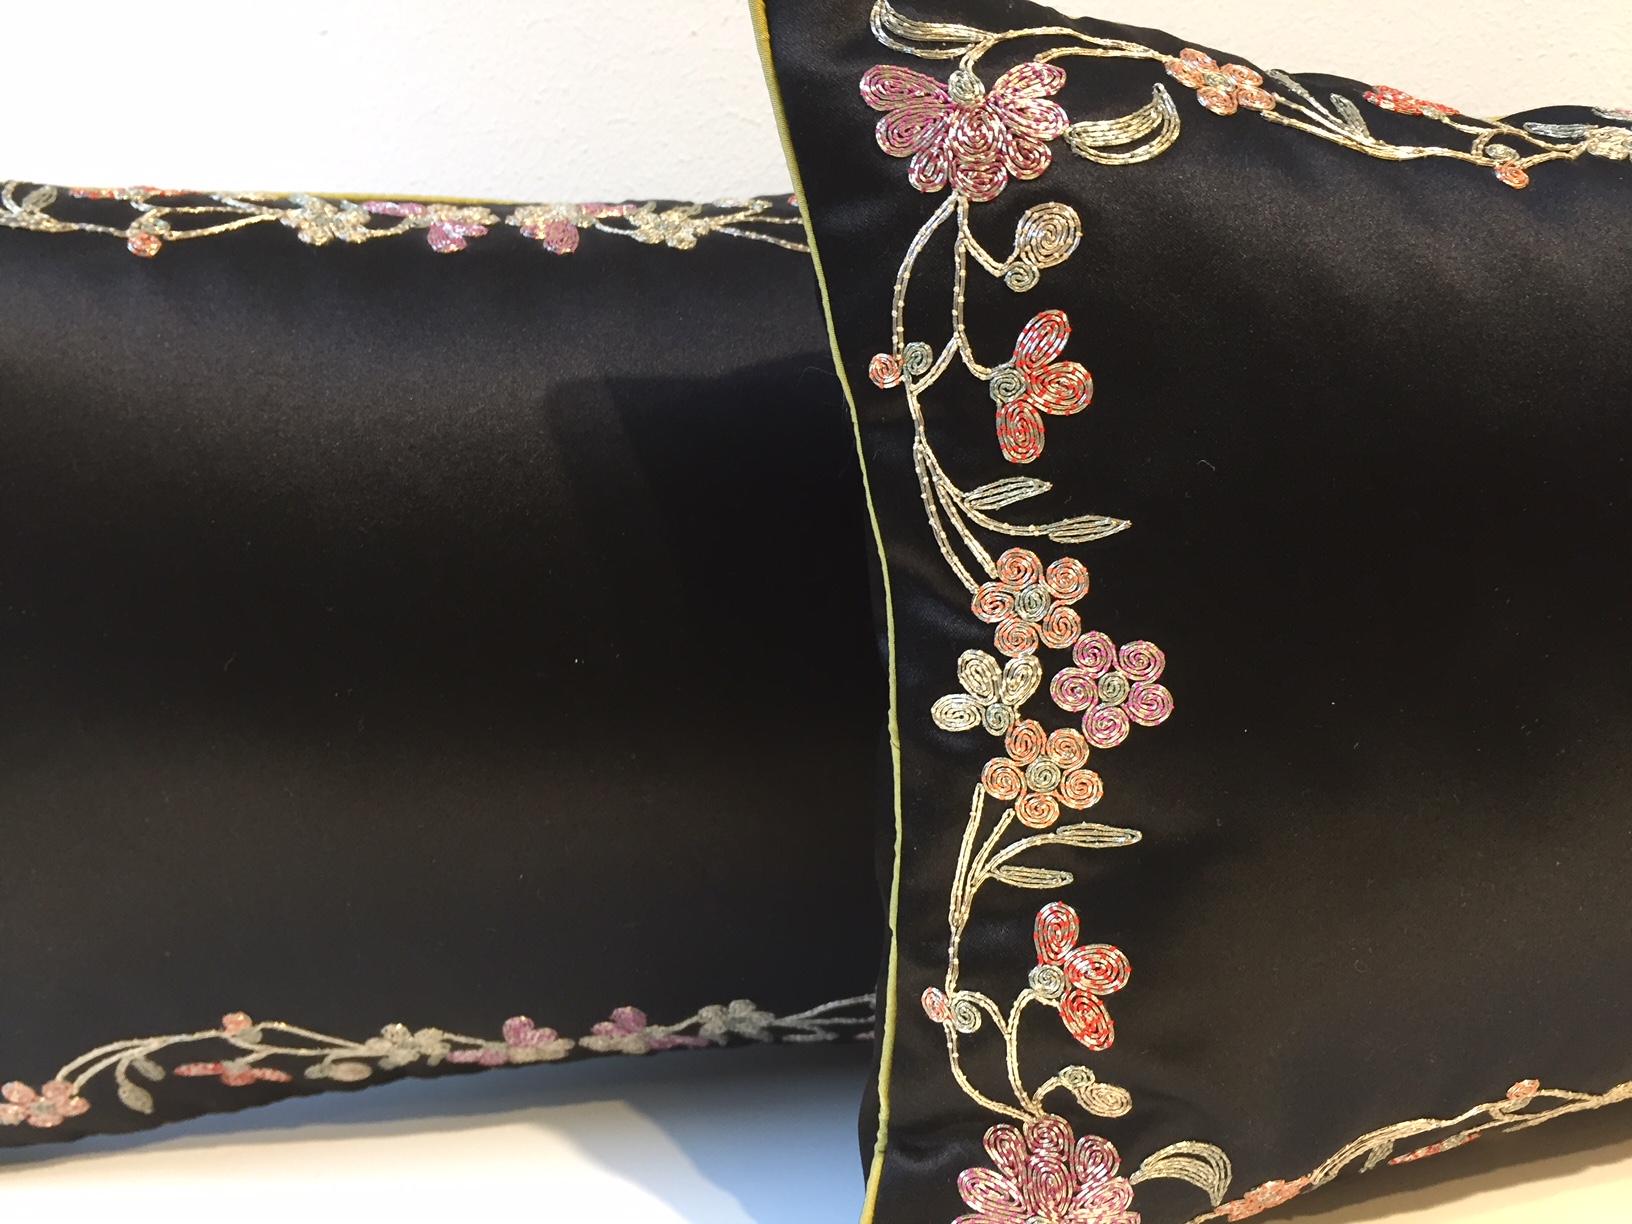 1 pair cushion, hand embroidery with silk and silver thread work, Chinese inspired floral border, piping in silk color ginger, back side plain silk,
Size: 20 x 30cm, concealed zip, cotton lining, feather inner.